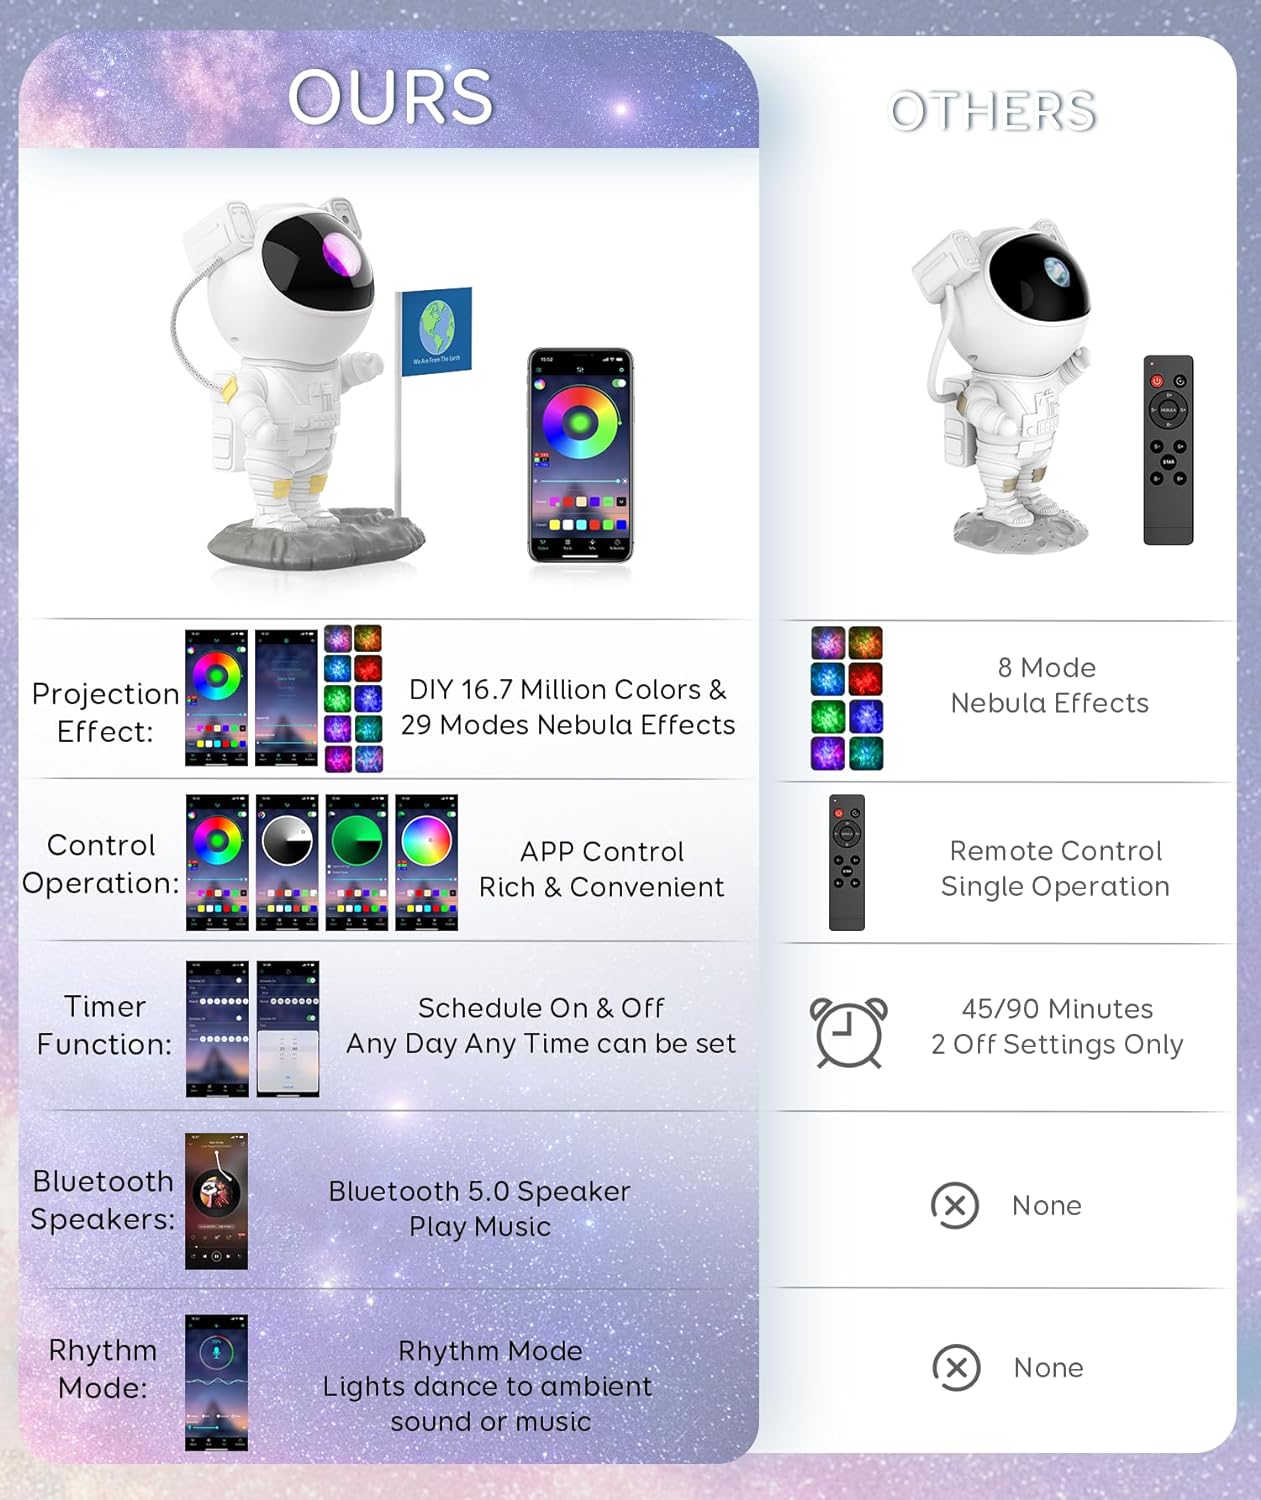 Bluetooth Speakers With Powerful Sound Astronaut Shape Galaxy Star Projector Light Christmas Birthday Gift for Men Women Friend magcubicvision.com